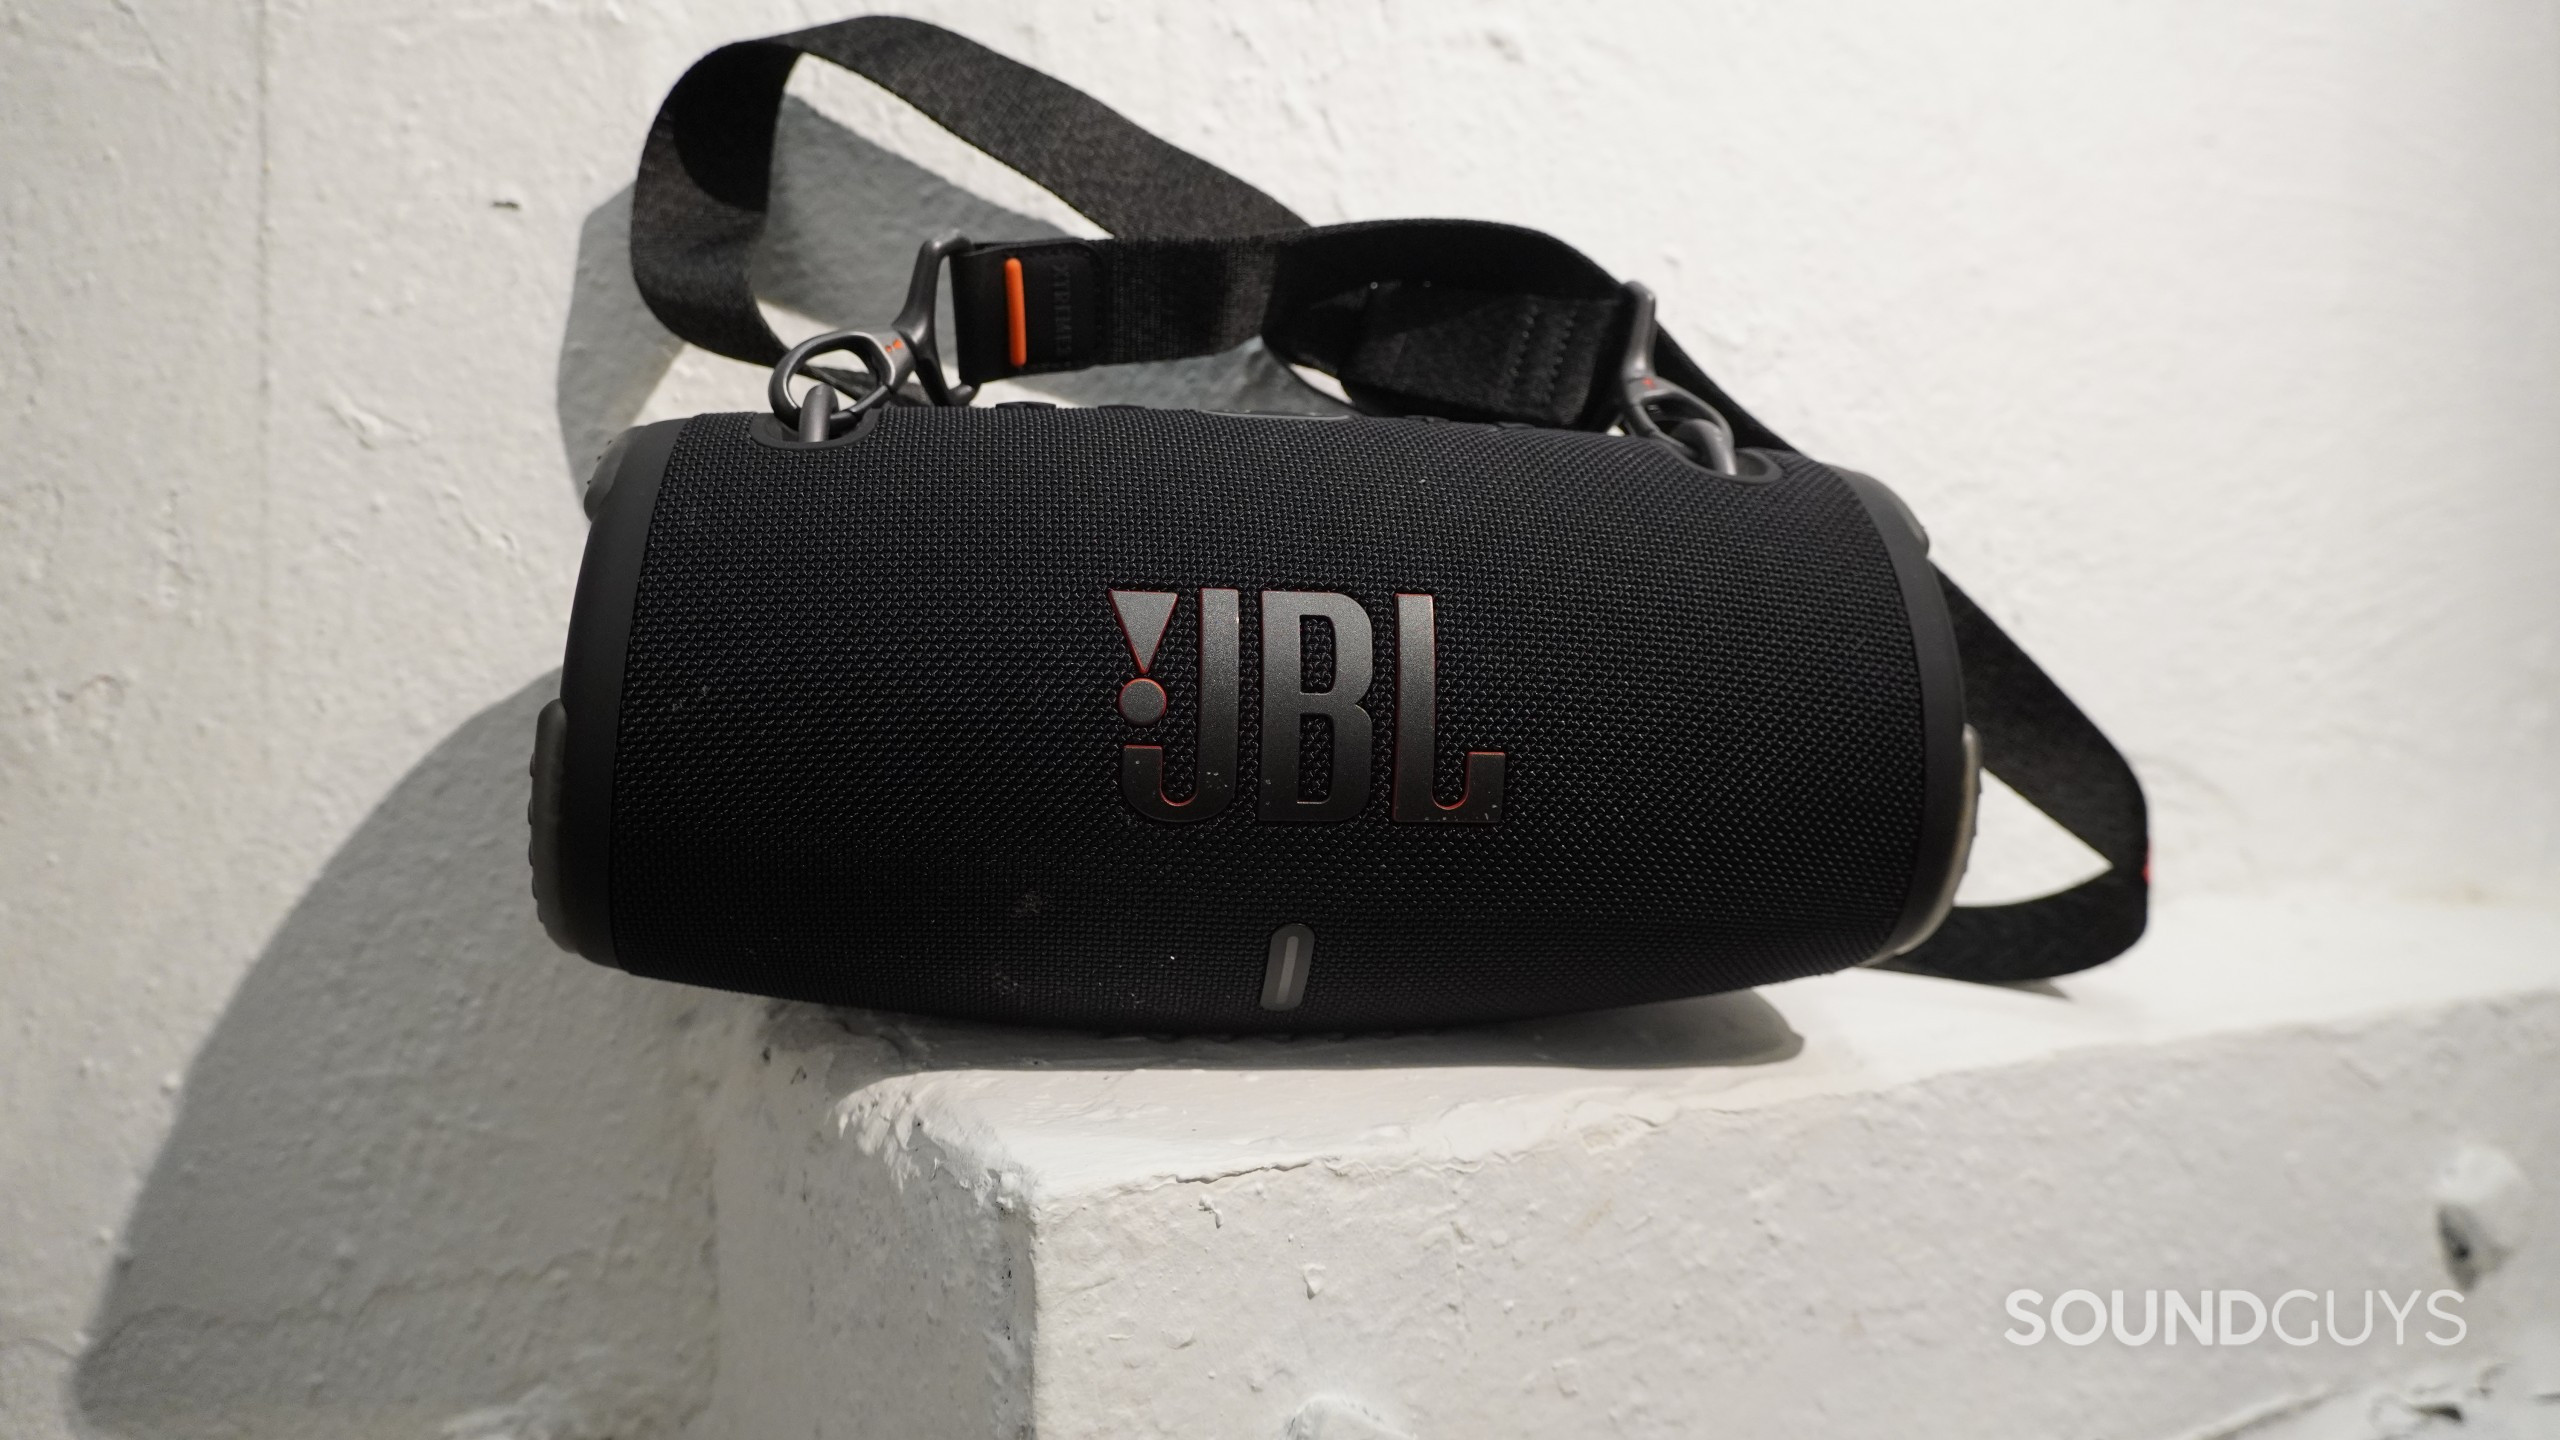 JBL Xtreme 3 review: Extremely loud, not so portable - SoundGuys